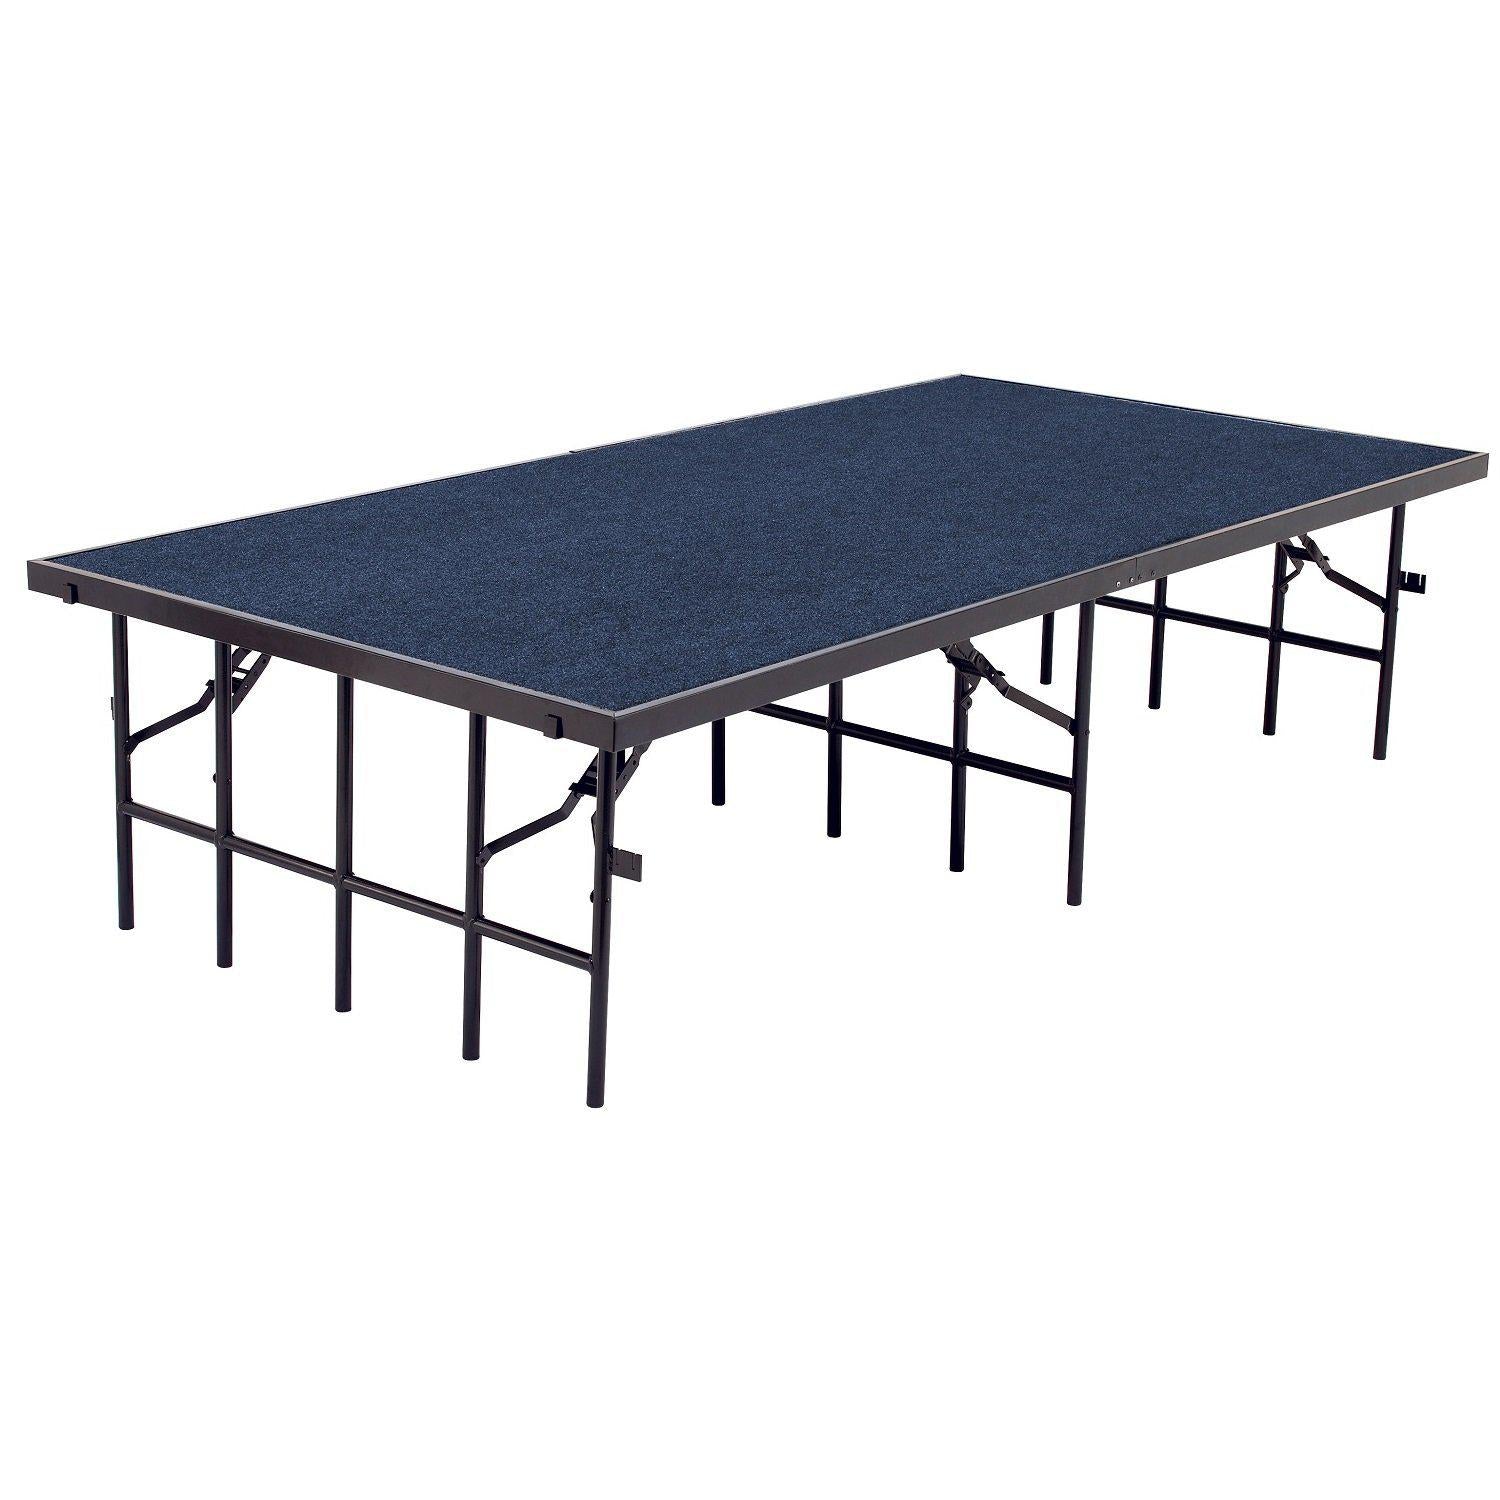 NPS® Single Level Stages-Stages & Risers-3' x 8'-8"-Blue Carpet